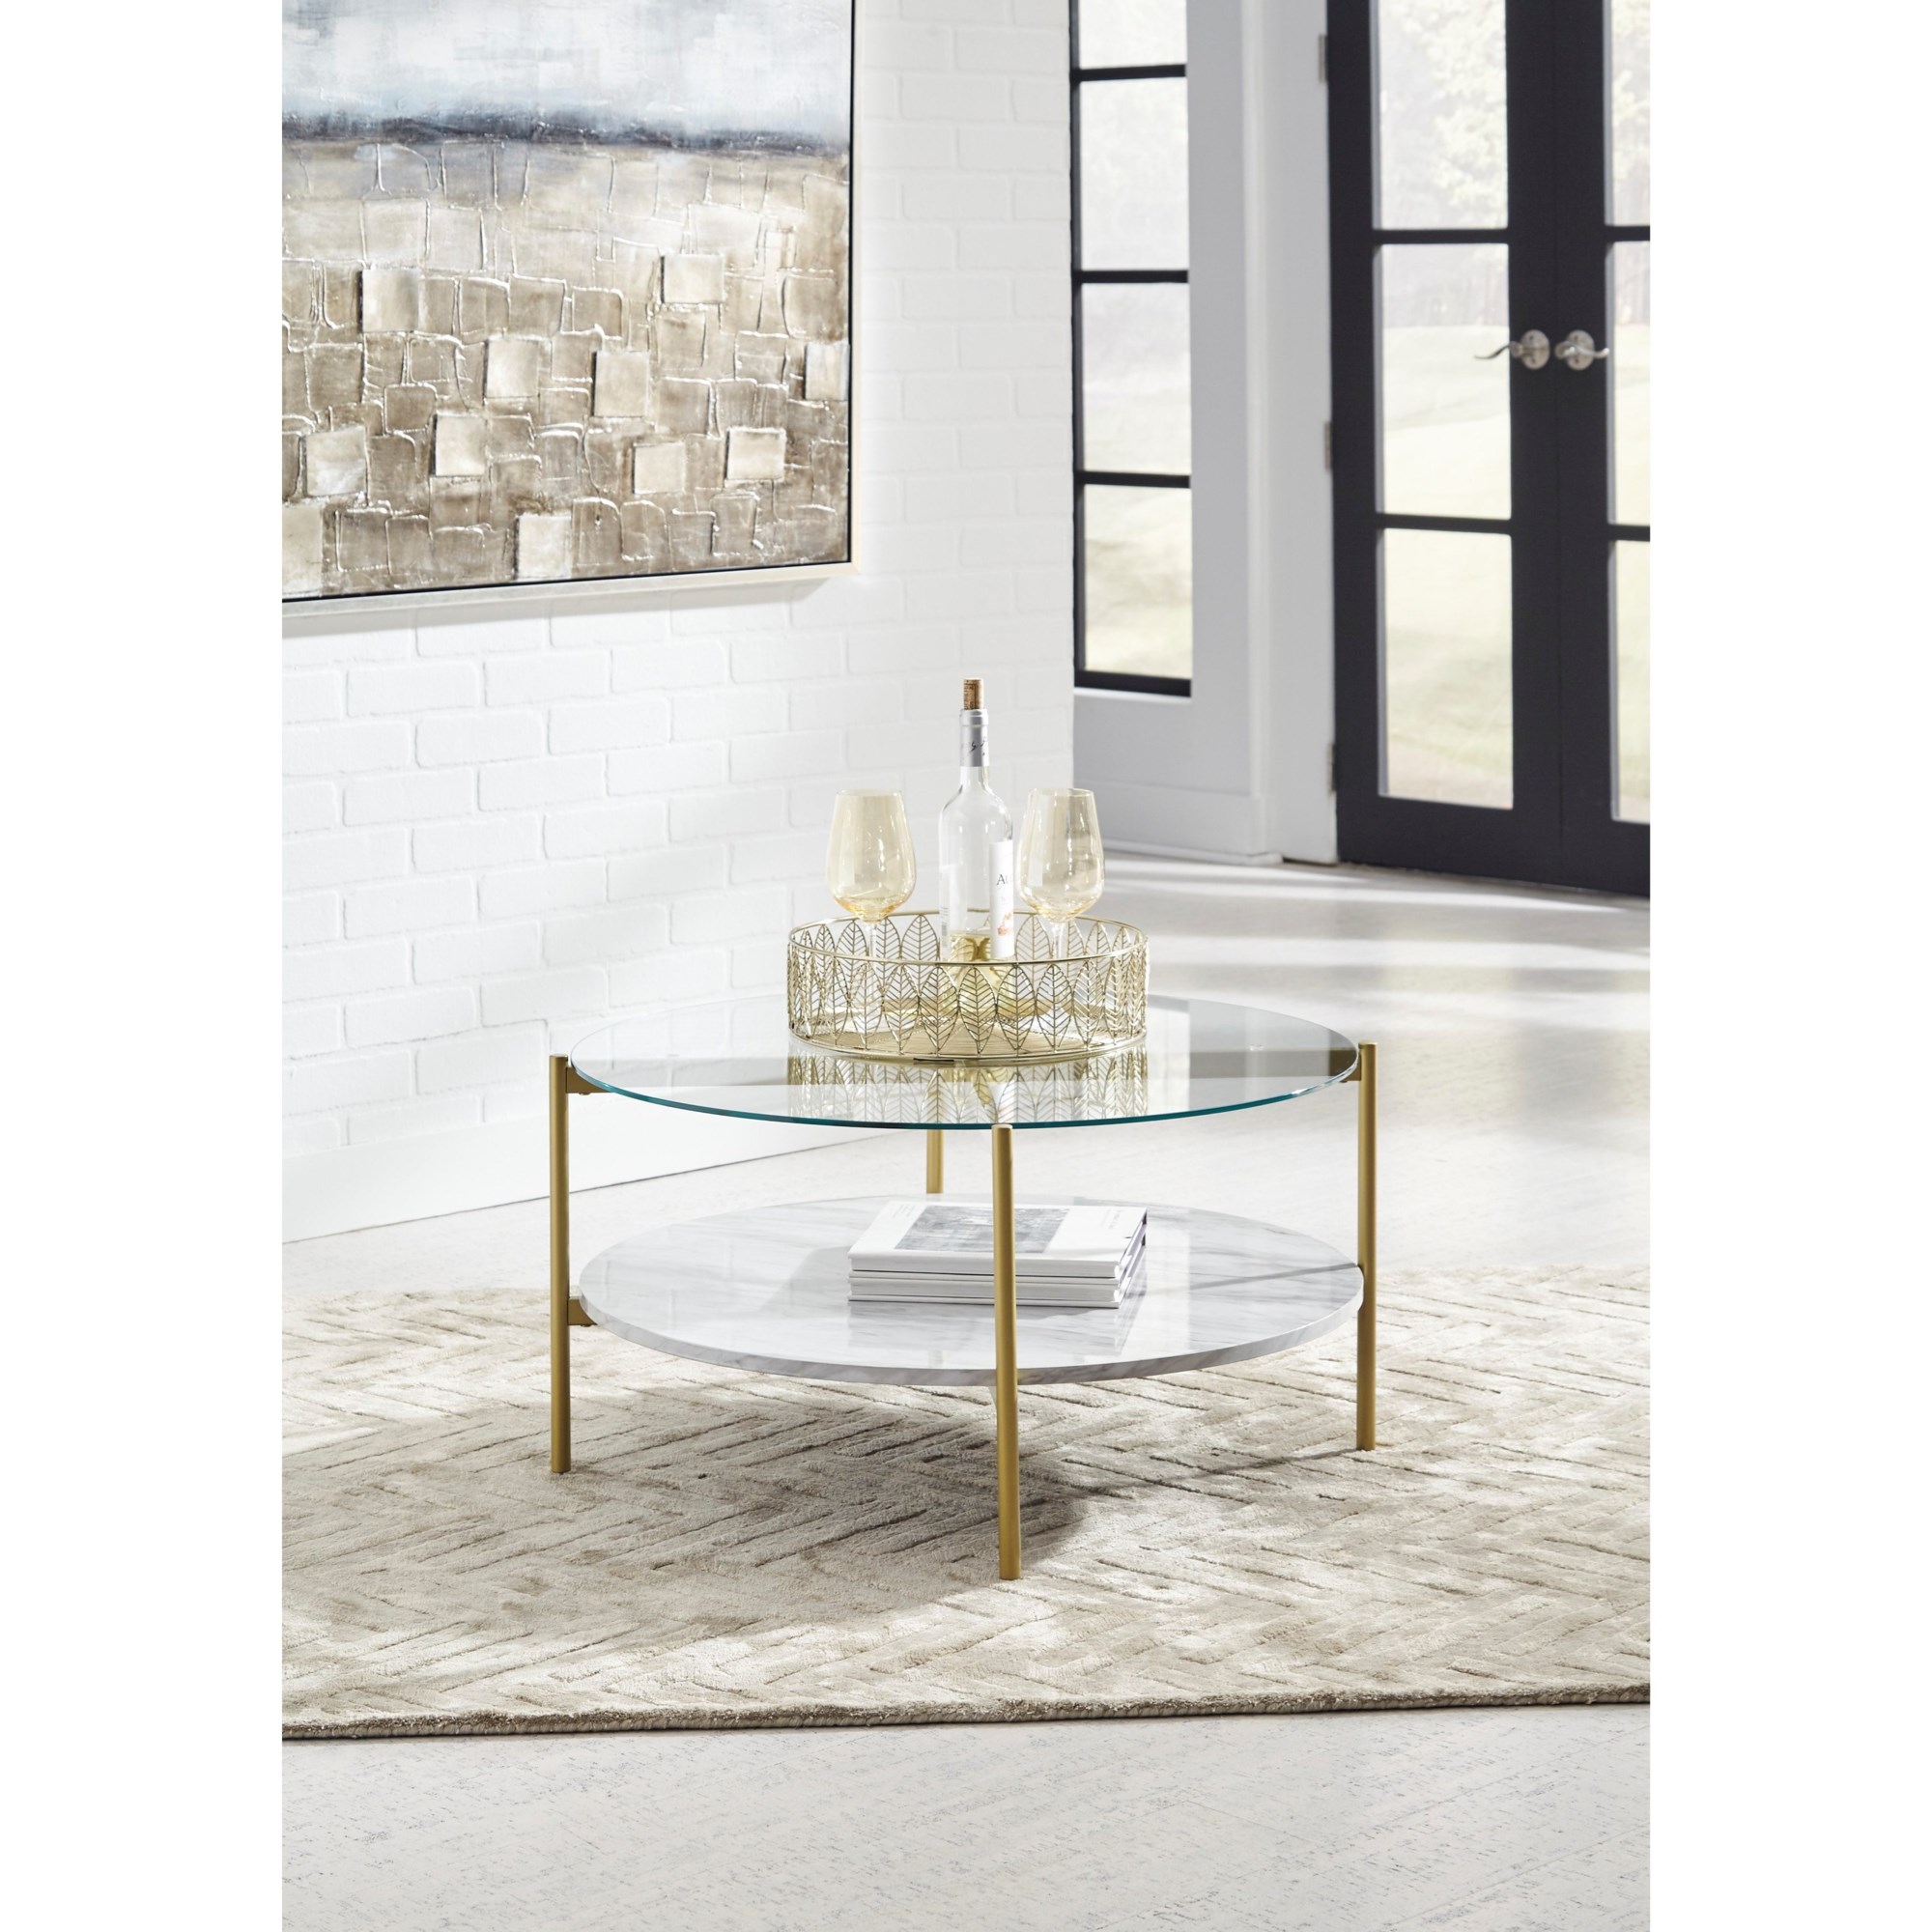 Signature Design by Ashley Wynora T192-8 Gold Finish Round Cocktail Table  with Glass Top and Faux Marble Shelf | HomeWorld Furniture |  Cocktail/Coffee Tables